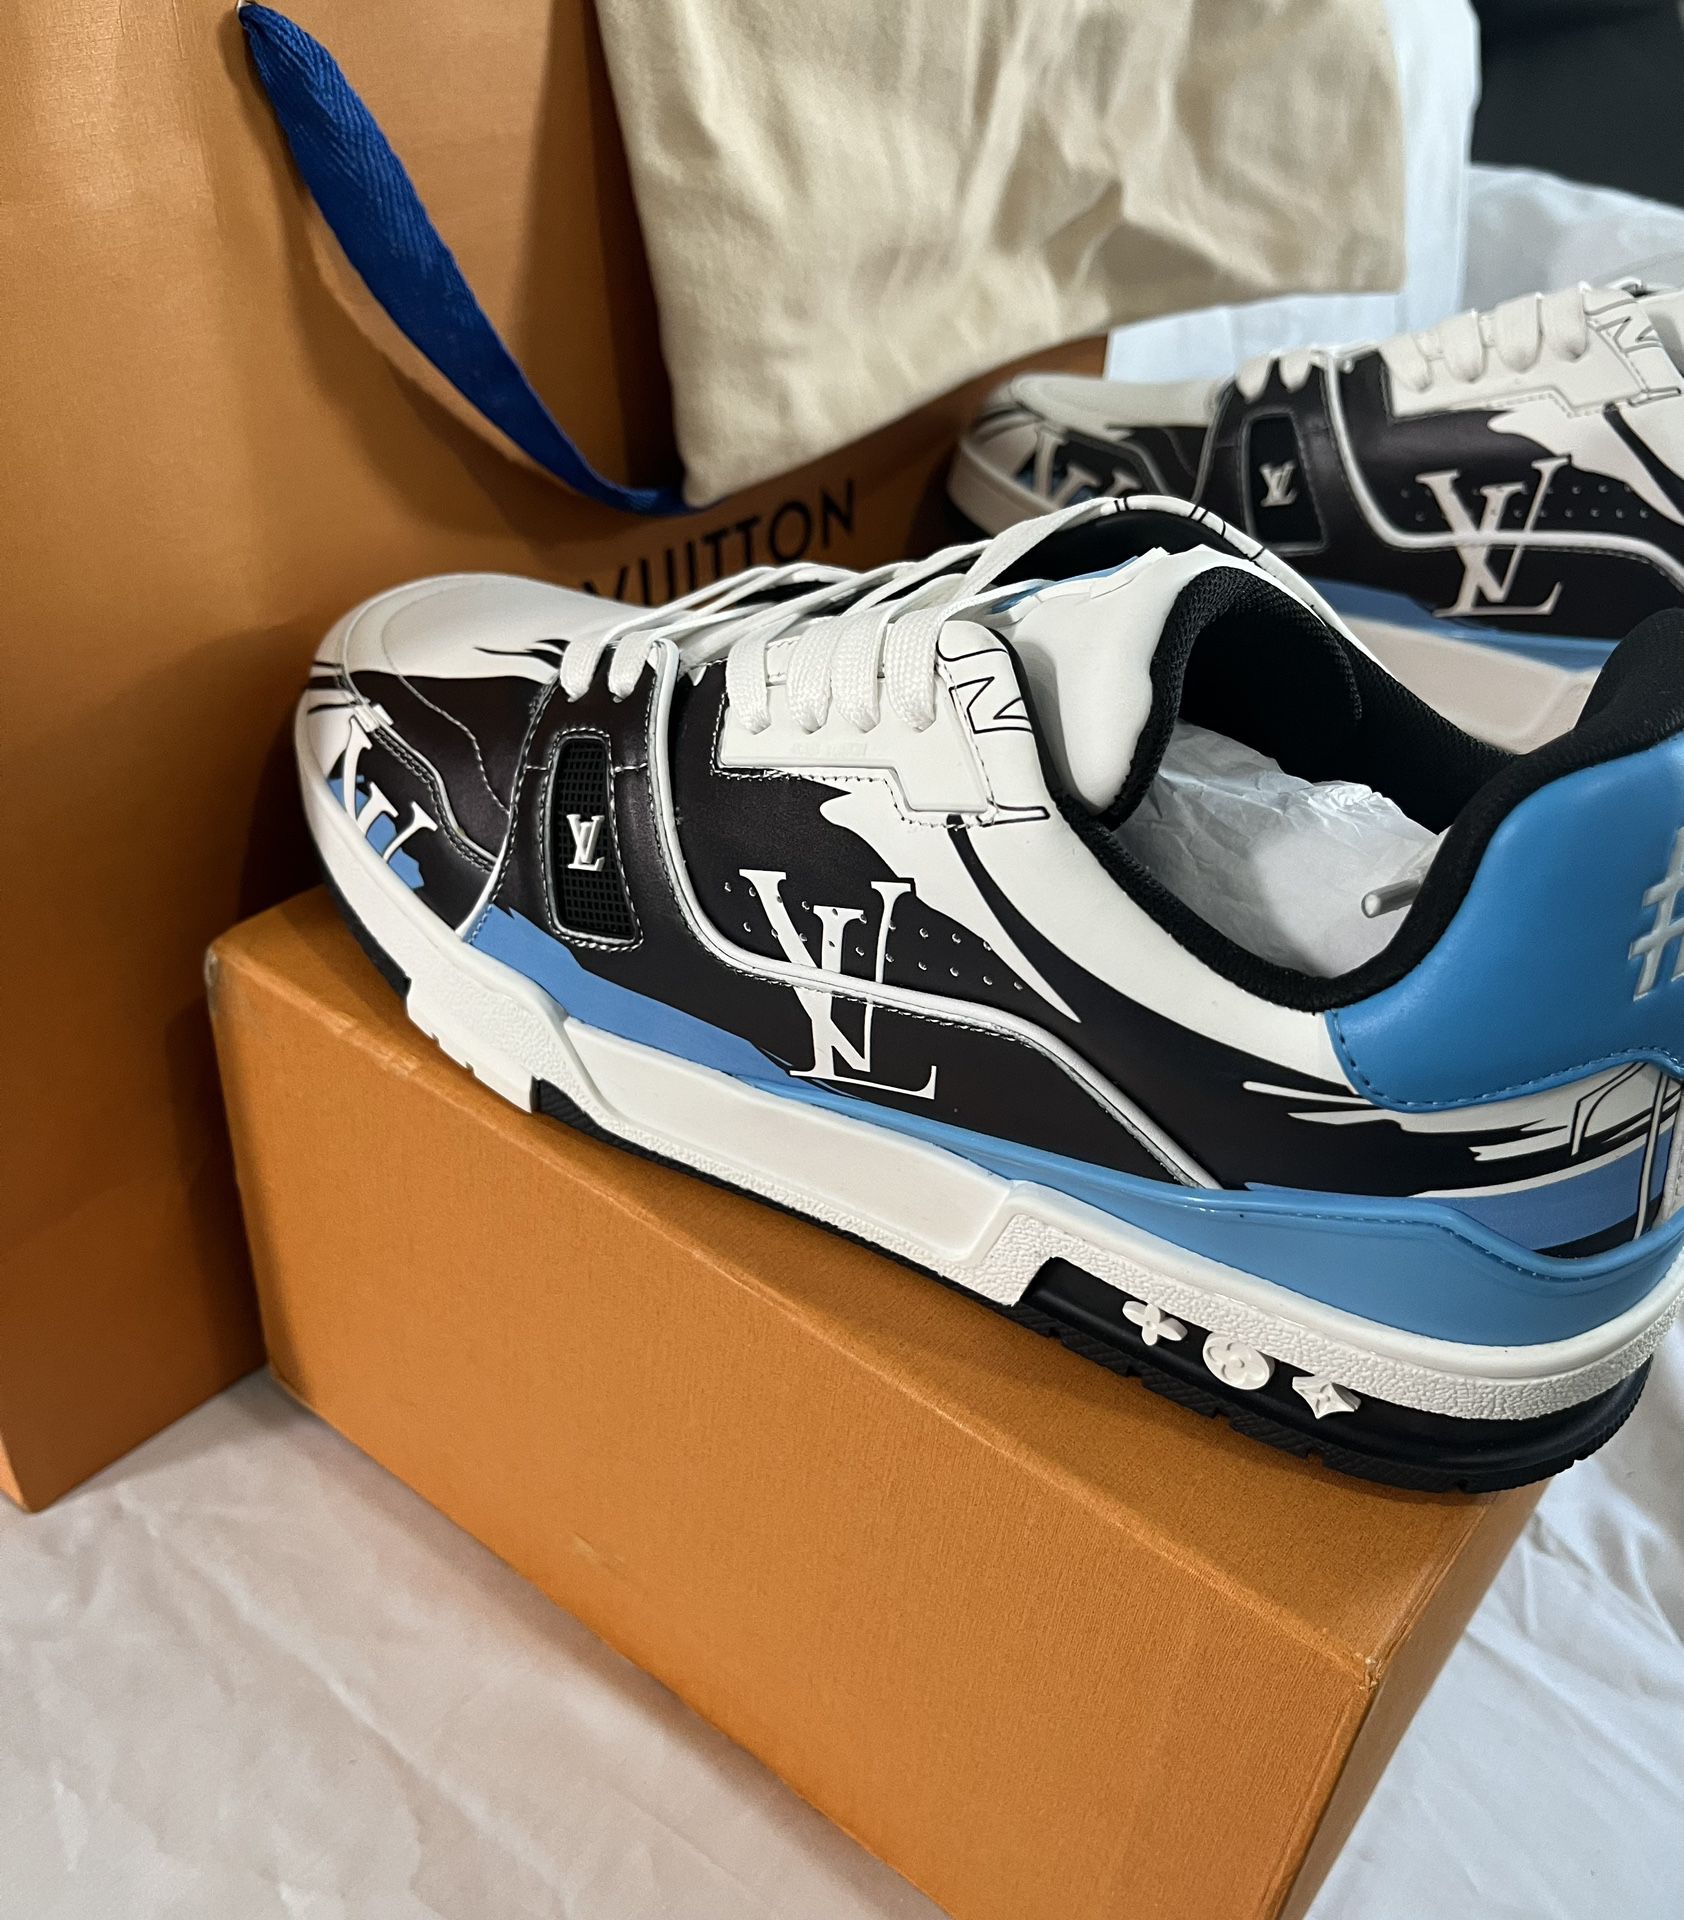 New Louis Vuitton Trainer #54 Graphic Print Blue/White Sneakers